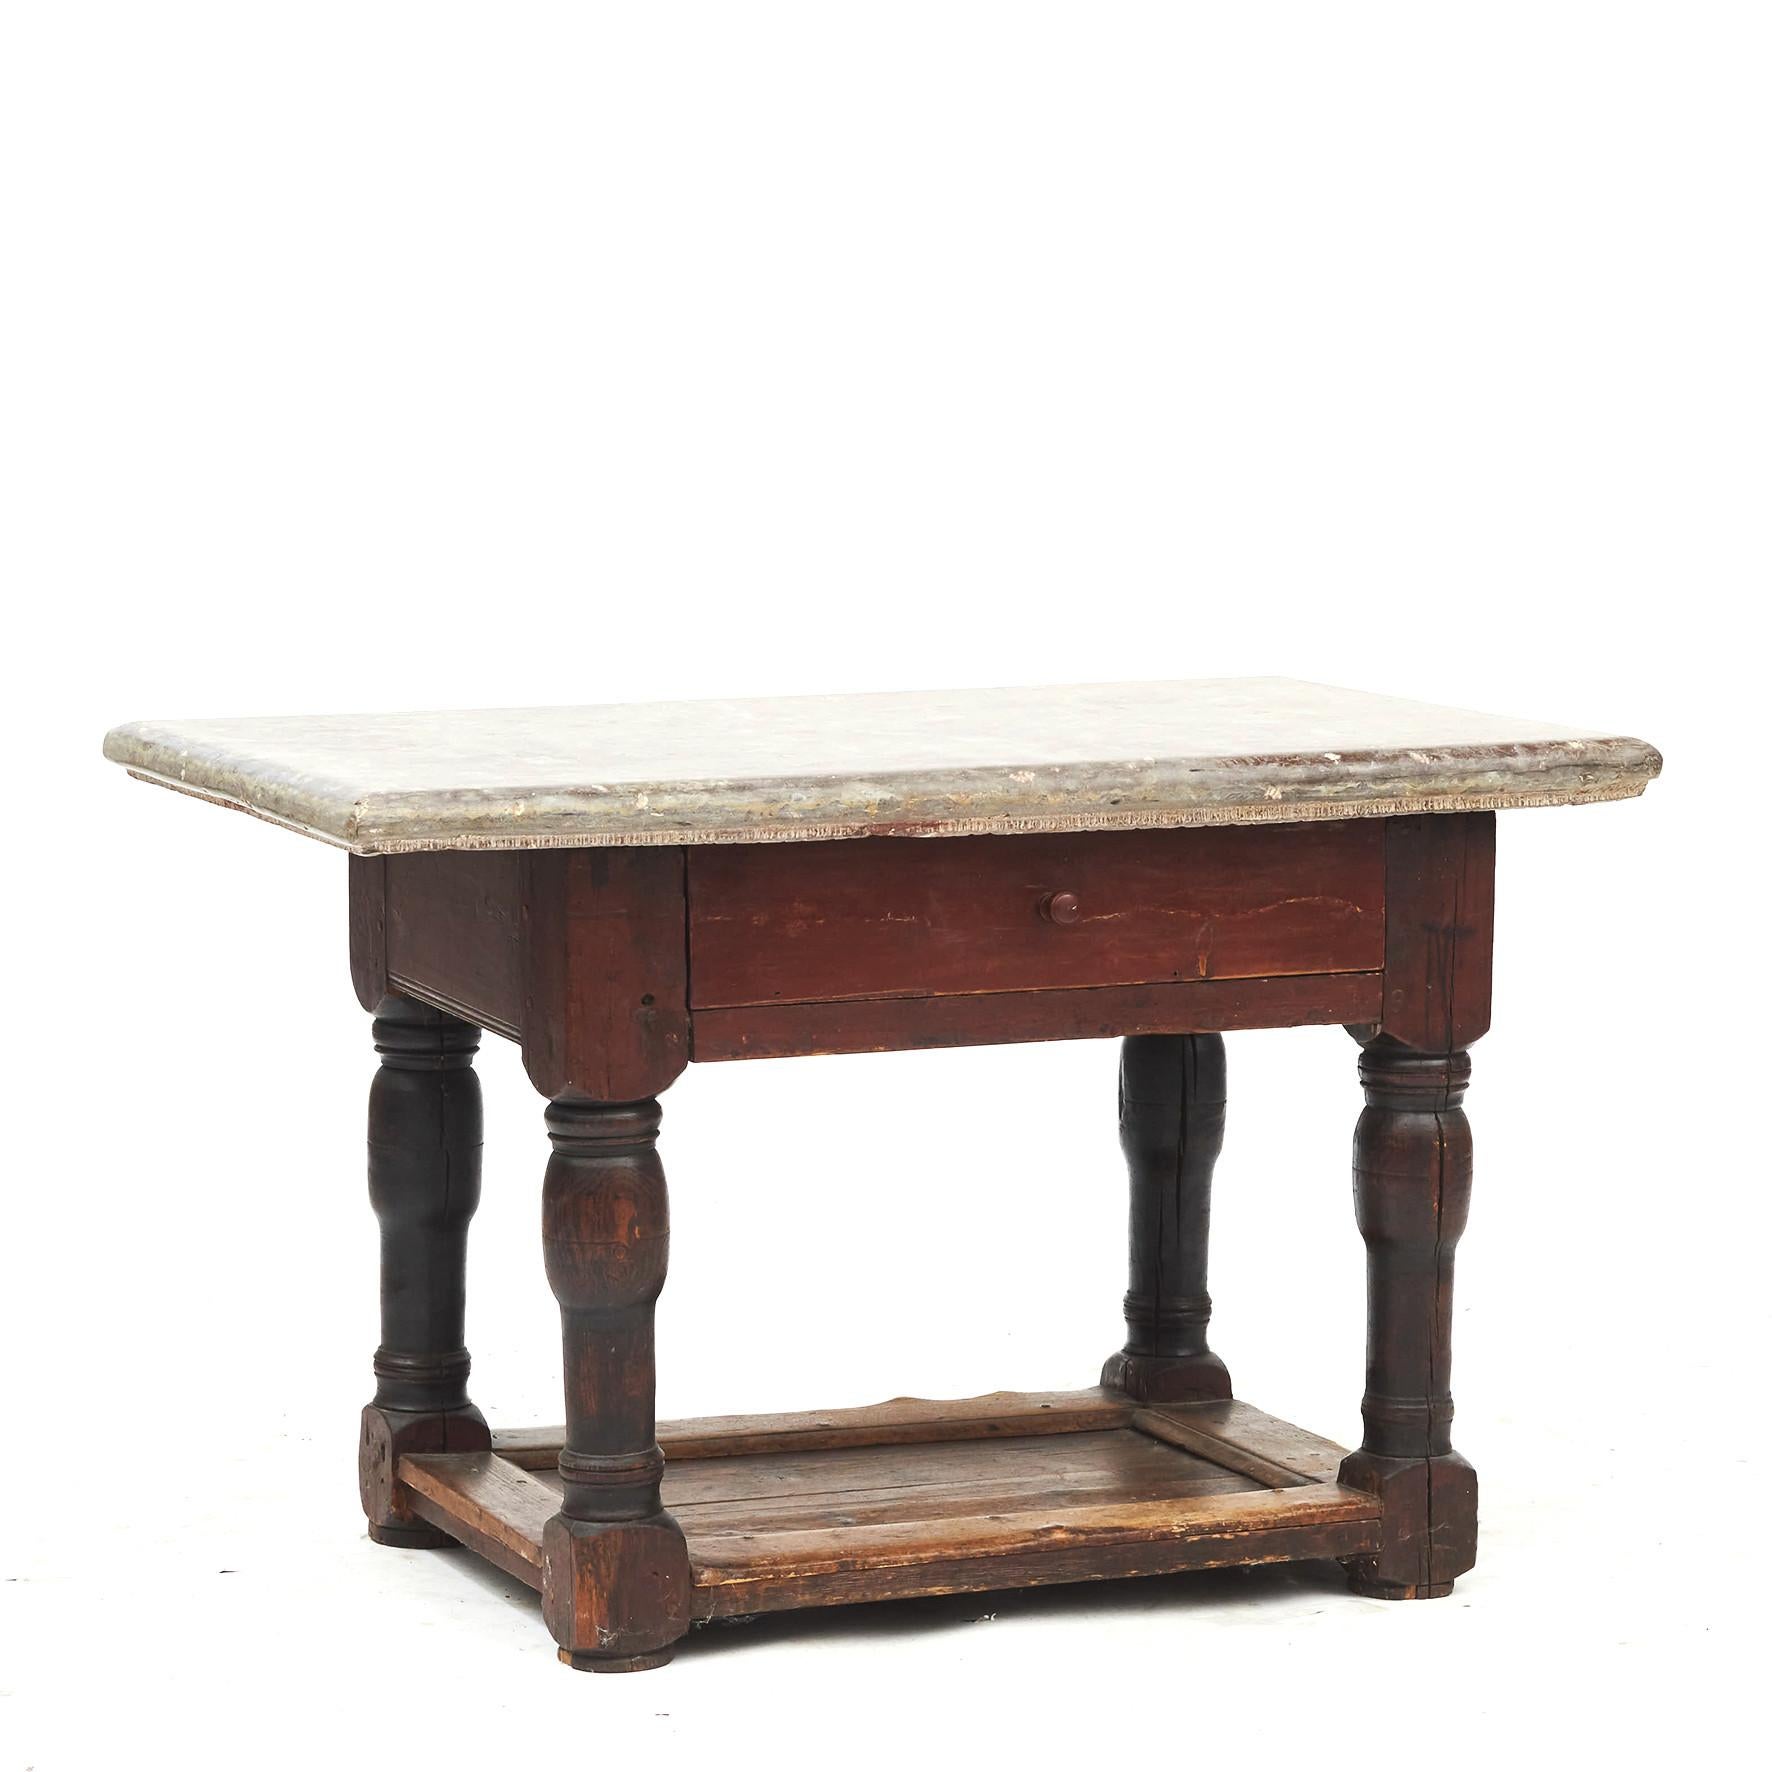 Swedish Baroque Table with Öland Limestone Top In Good Condition For Sale In Kastrup, DK